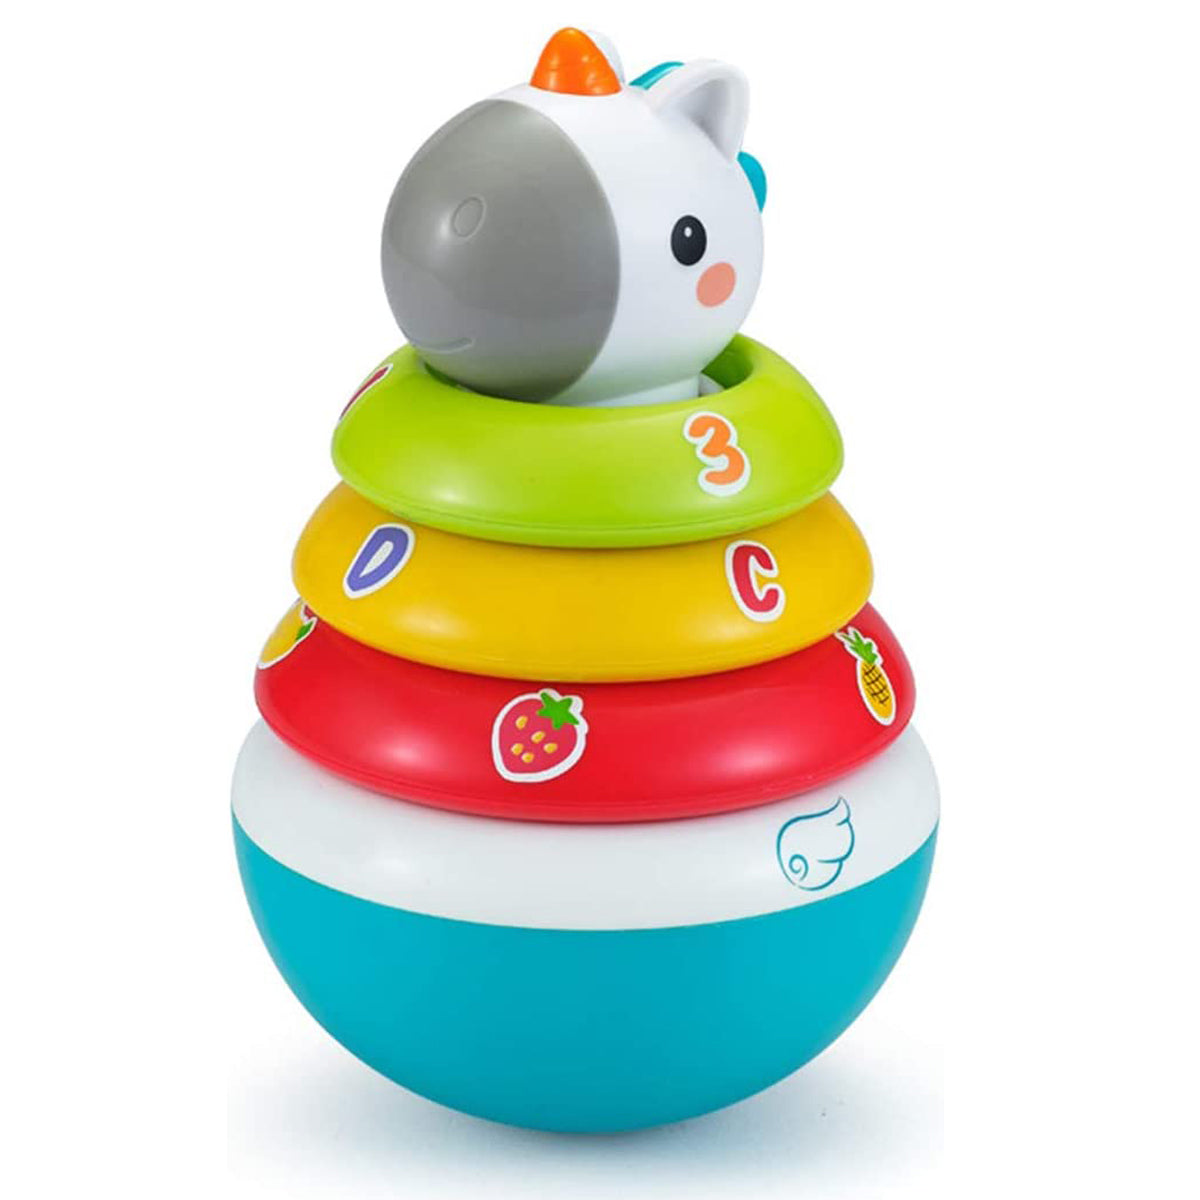 Roly Poly Stacker Rattle Toy